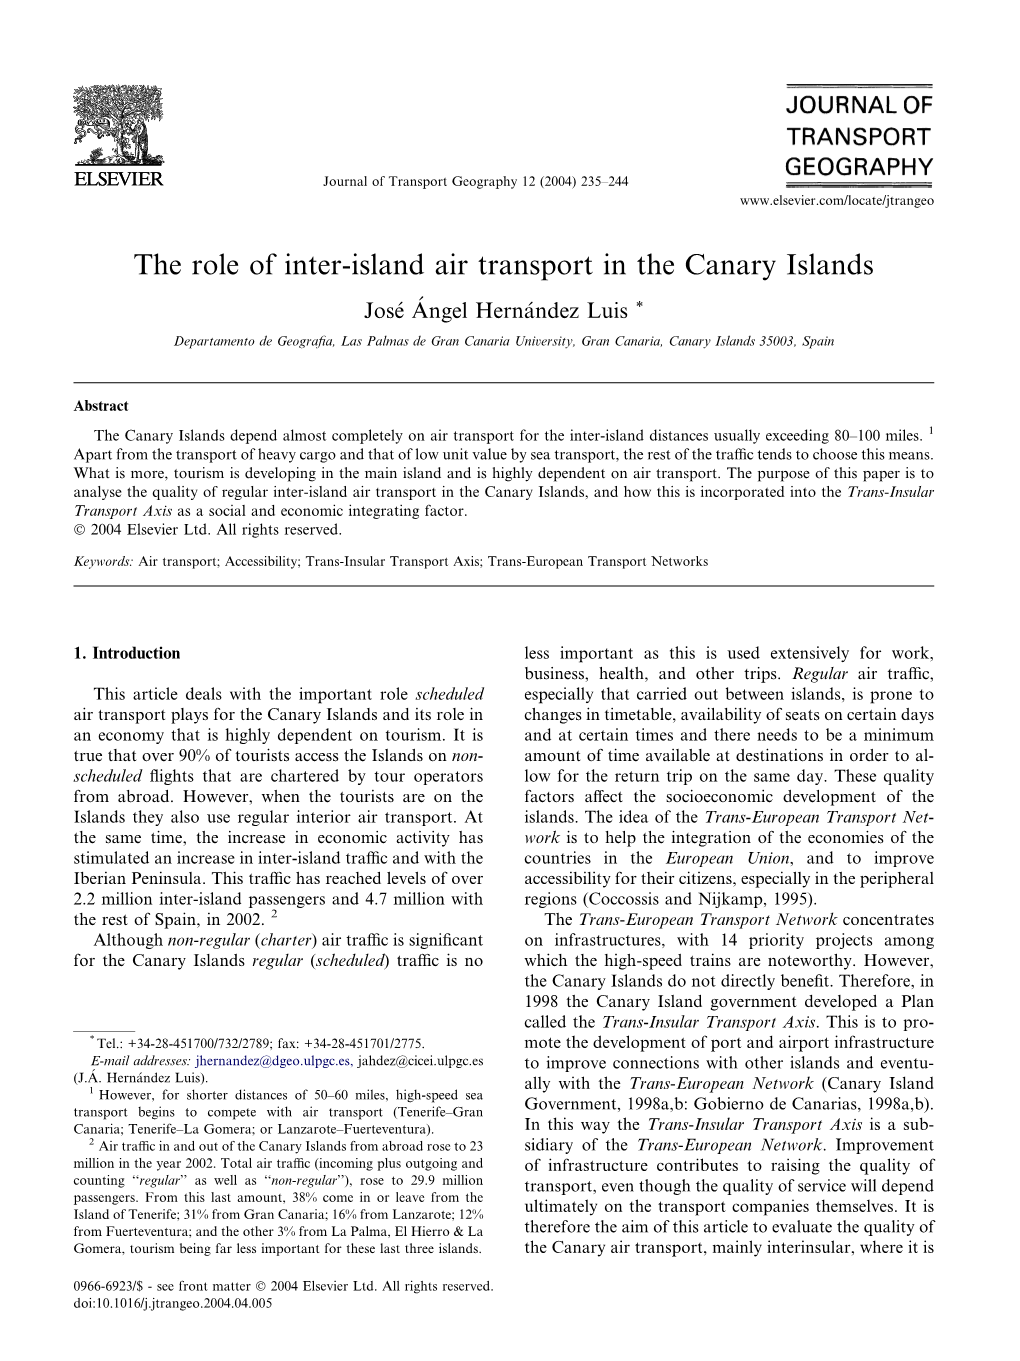 The Role of Inter-Island Air Transport in the Canary Islands